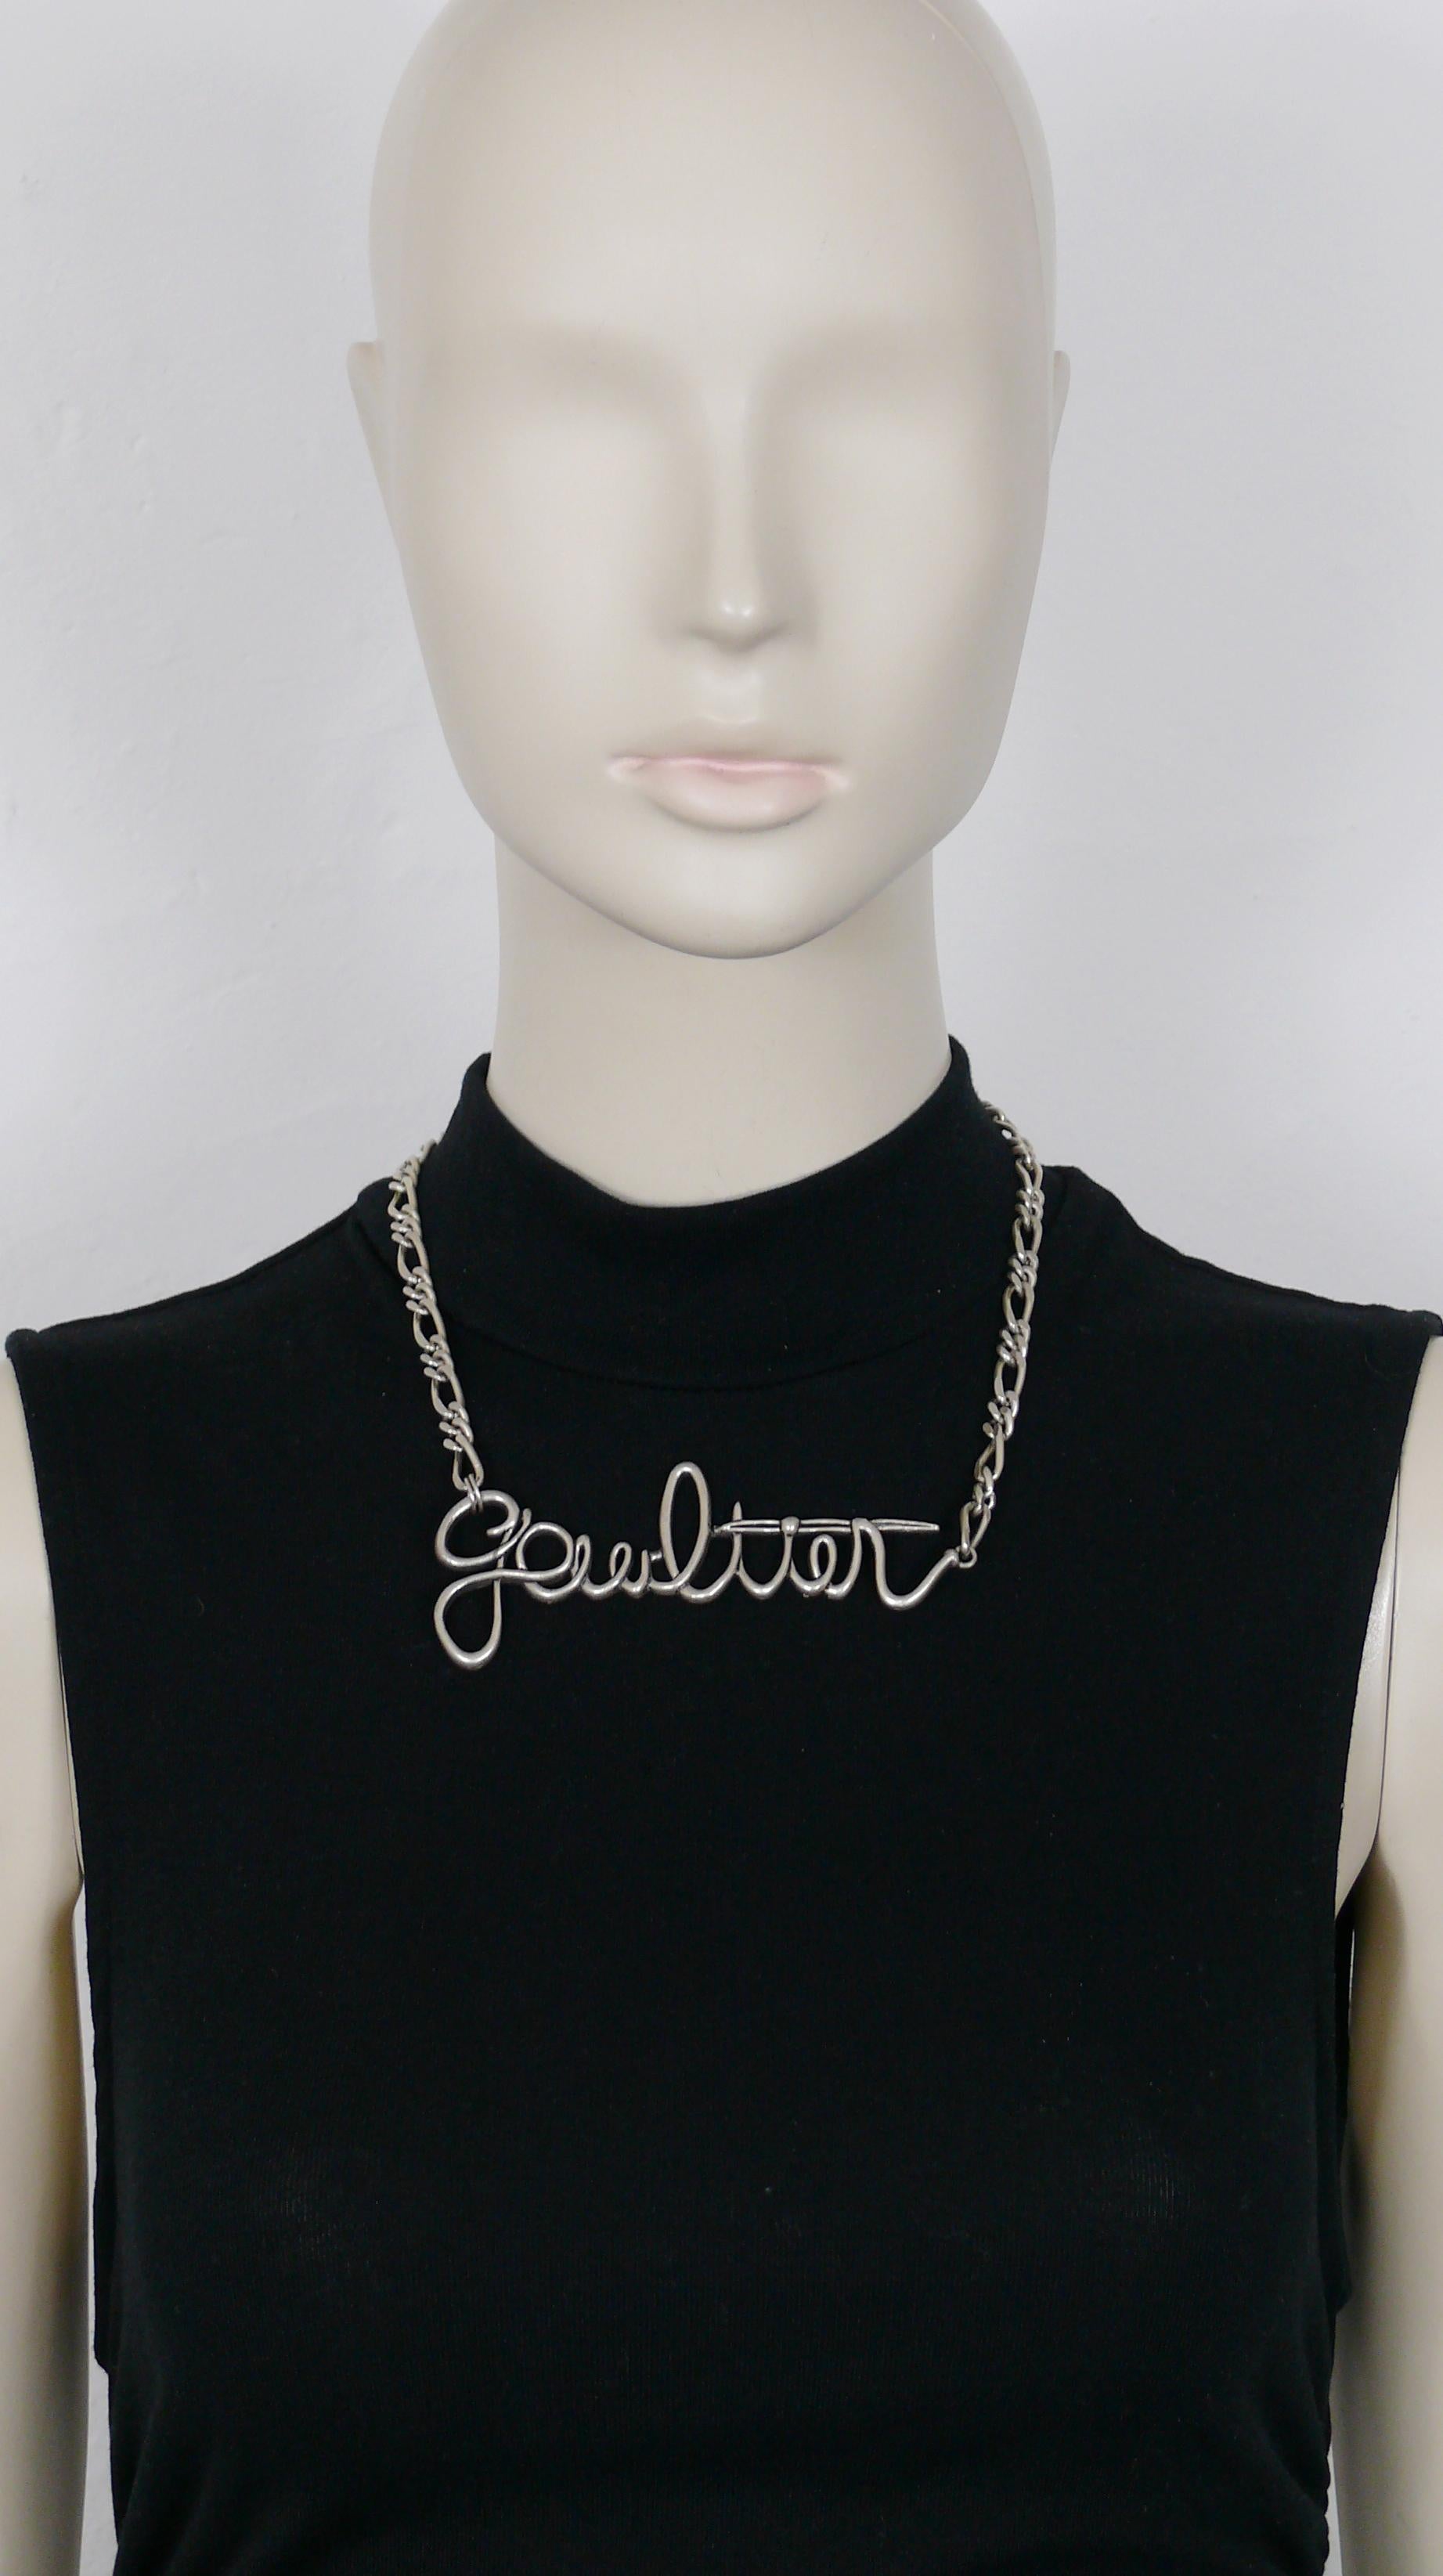 JEAN PAUL GAULTIER chain necklace featuring GAULTIER cursive signature.

Silver tone metal hardware.
Antiqued patina.

Lobster clasp closure.

Unmarked.

Indicative measurements : length approx. 48 cm (18.90 inches) / GAULTIER signature approx. max.